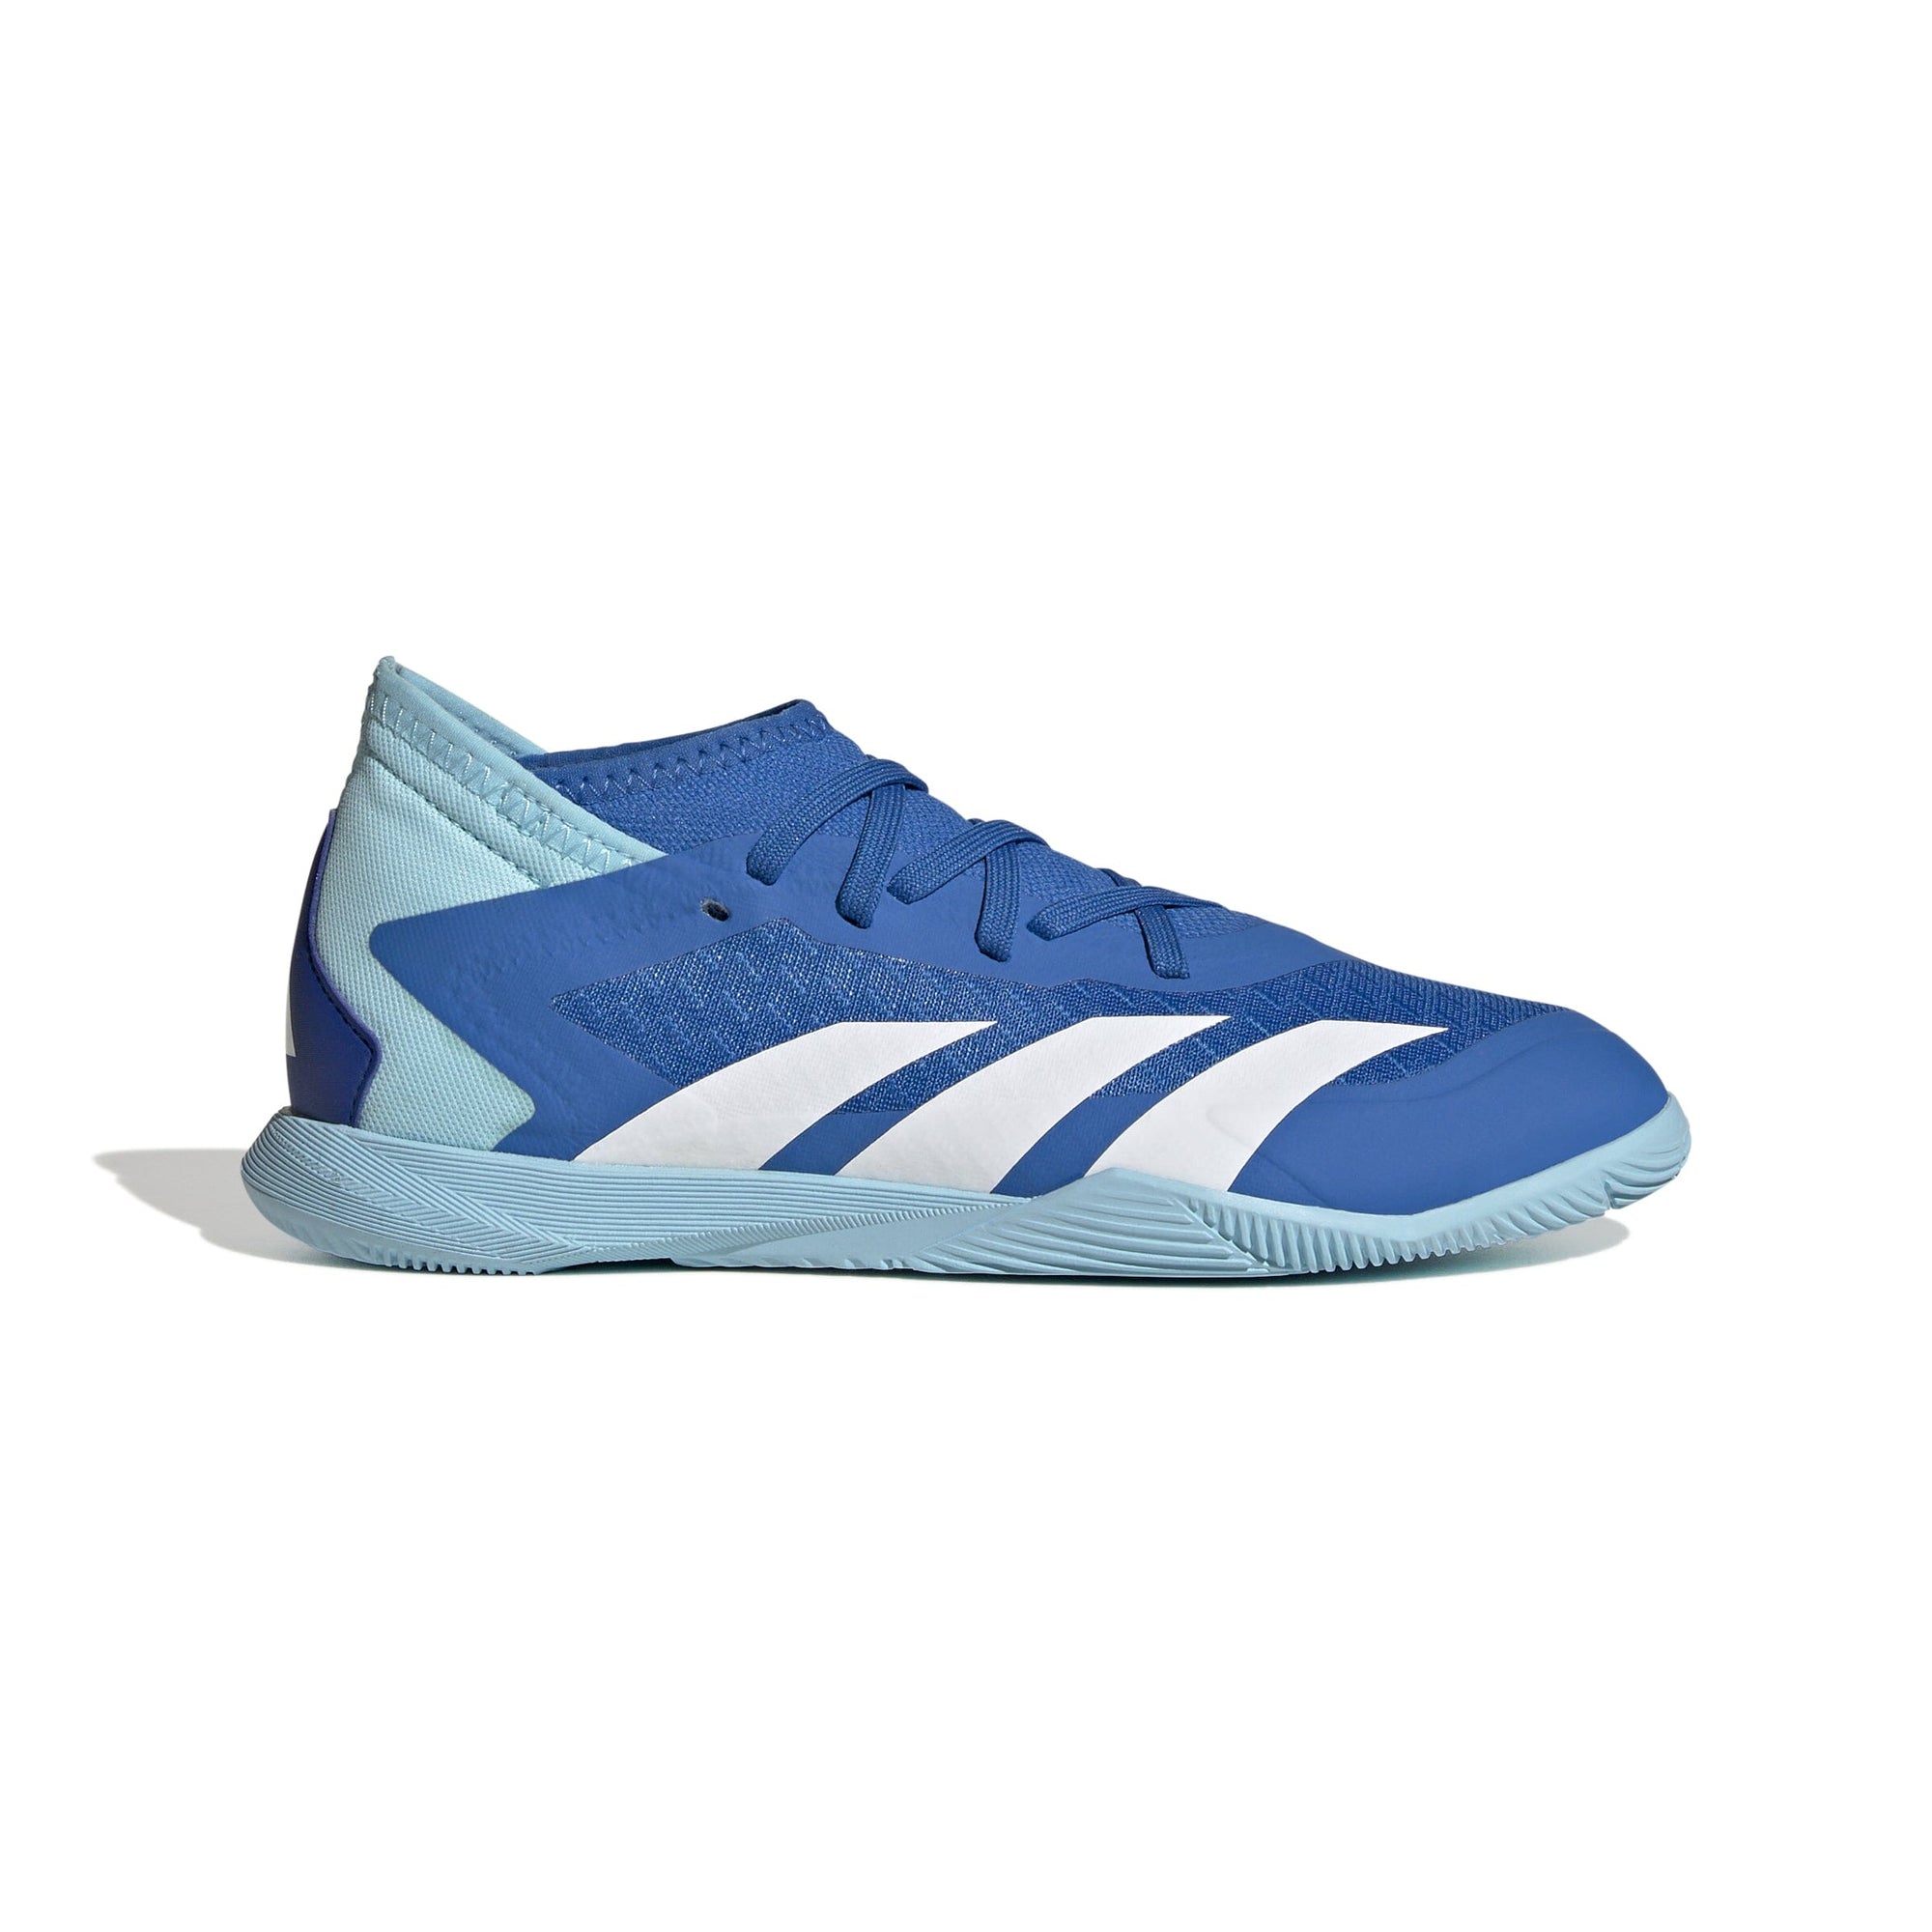 adidas Youth Predator Accuracy.3 Indoor Shoes | IE9448 Soccer Cleats Adidas 1 Bright Royal / FTWR White / Bliss Blue 